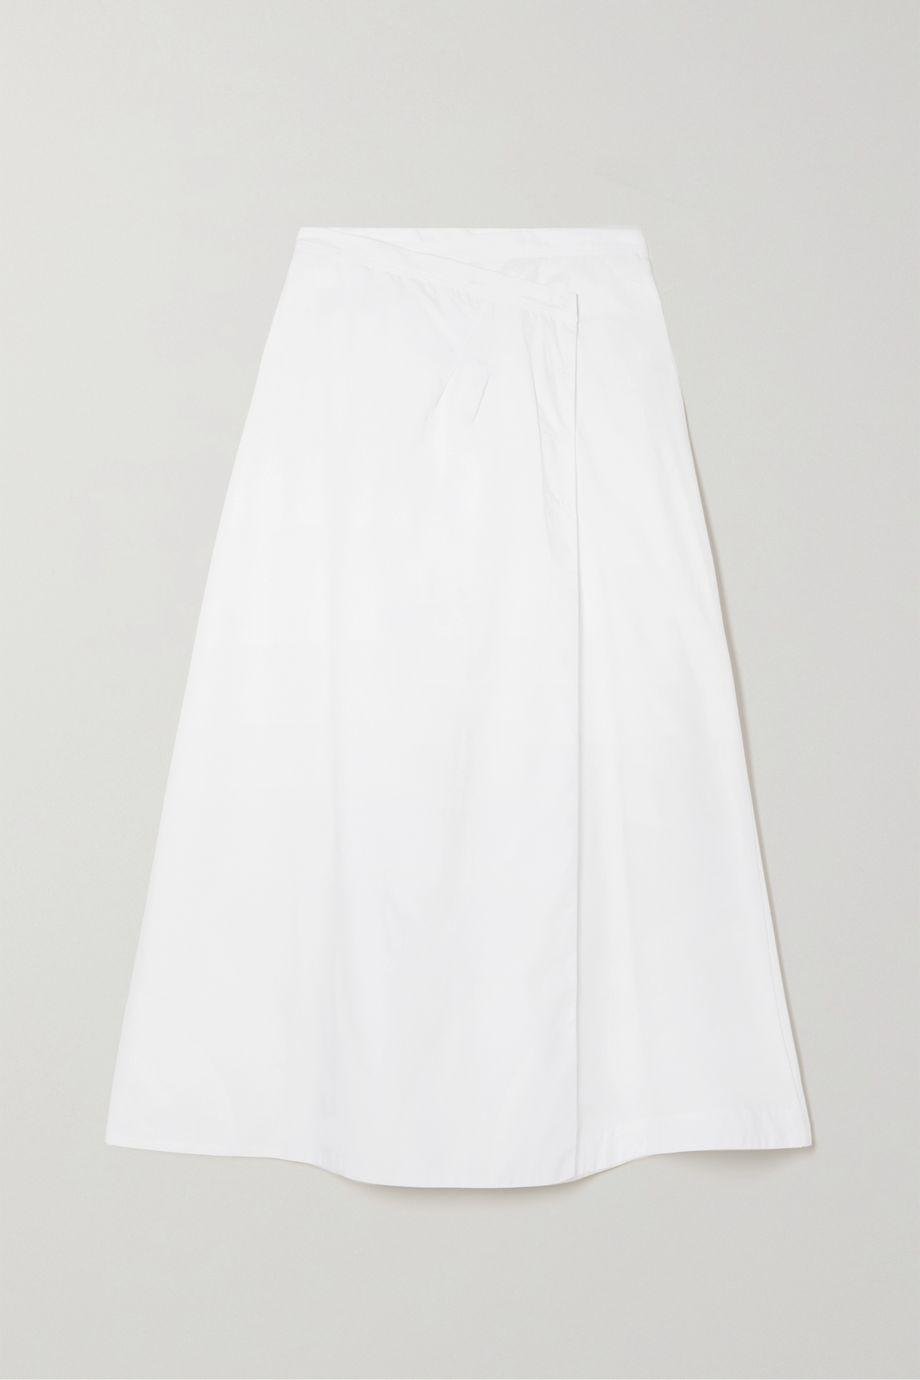 Cotton and Lyocell-blend poplin maxi wrap skirt by CAES